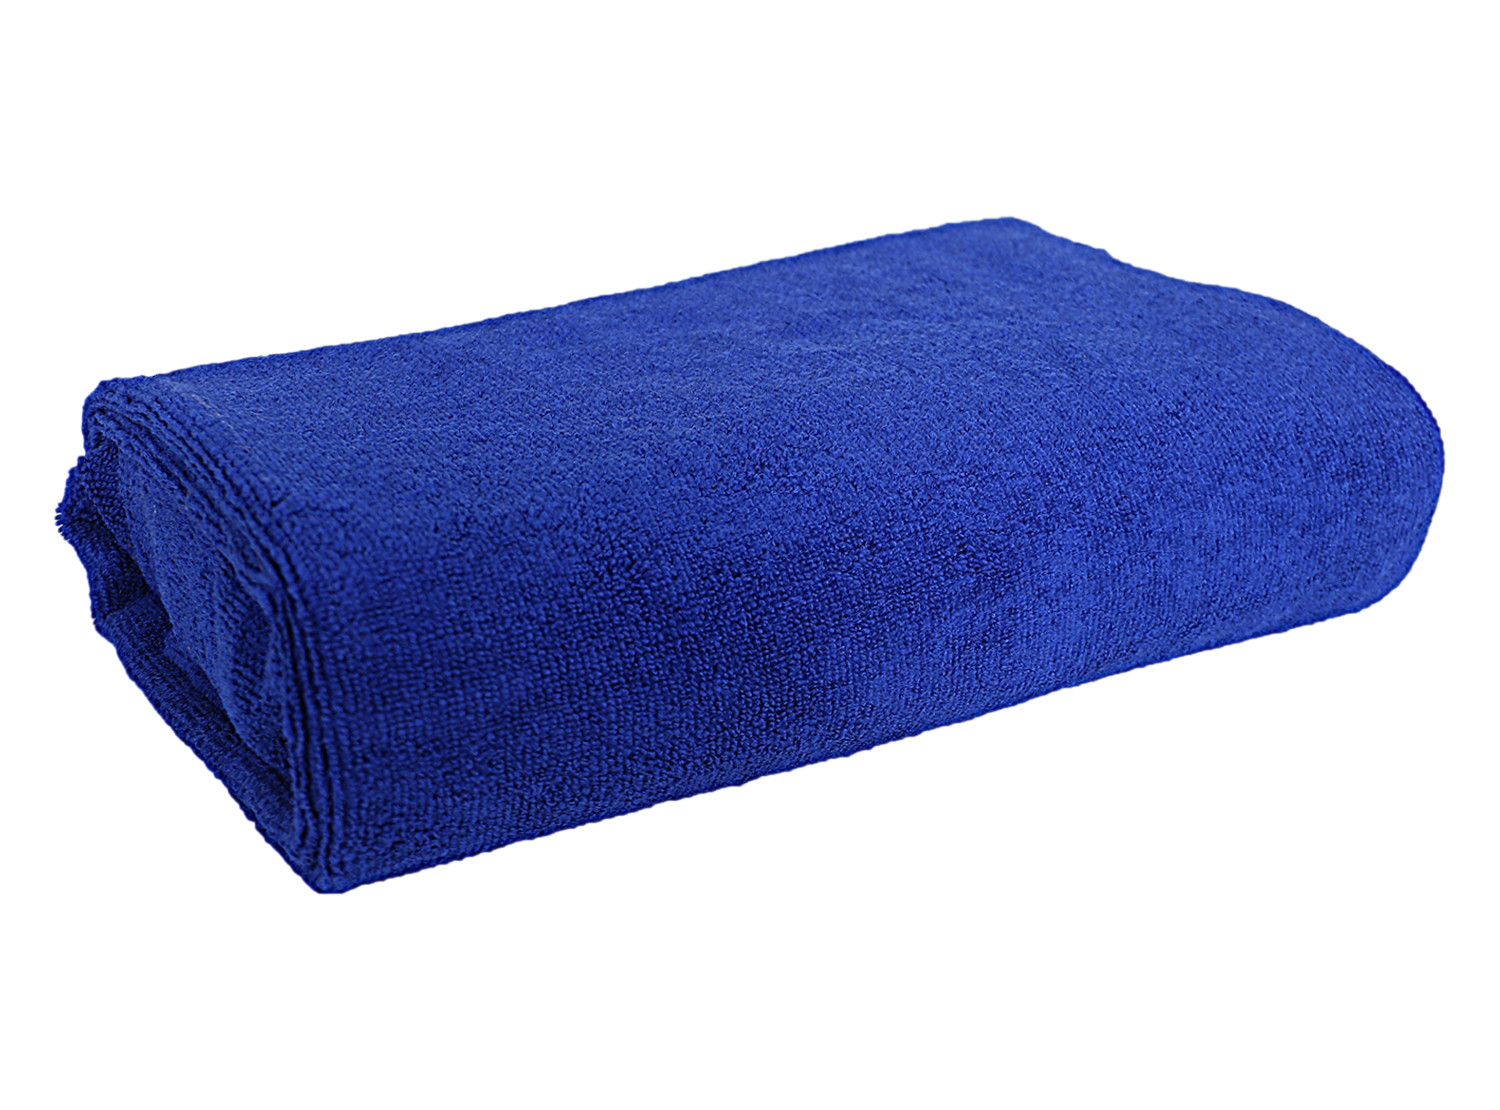 Kuber Industries Lightweight Bath Towel|Soft Absorbent Cotton Anti-Bacterial & Quick Dry Shower Towel For Bathroom,Hotel,Gym,Travel (Blue)